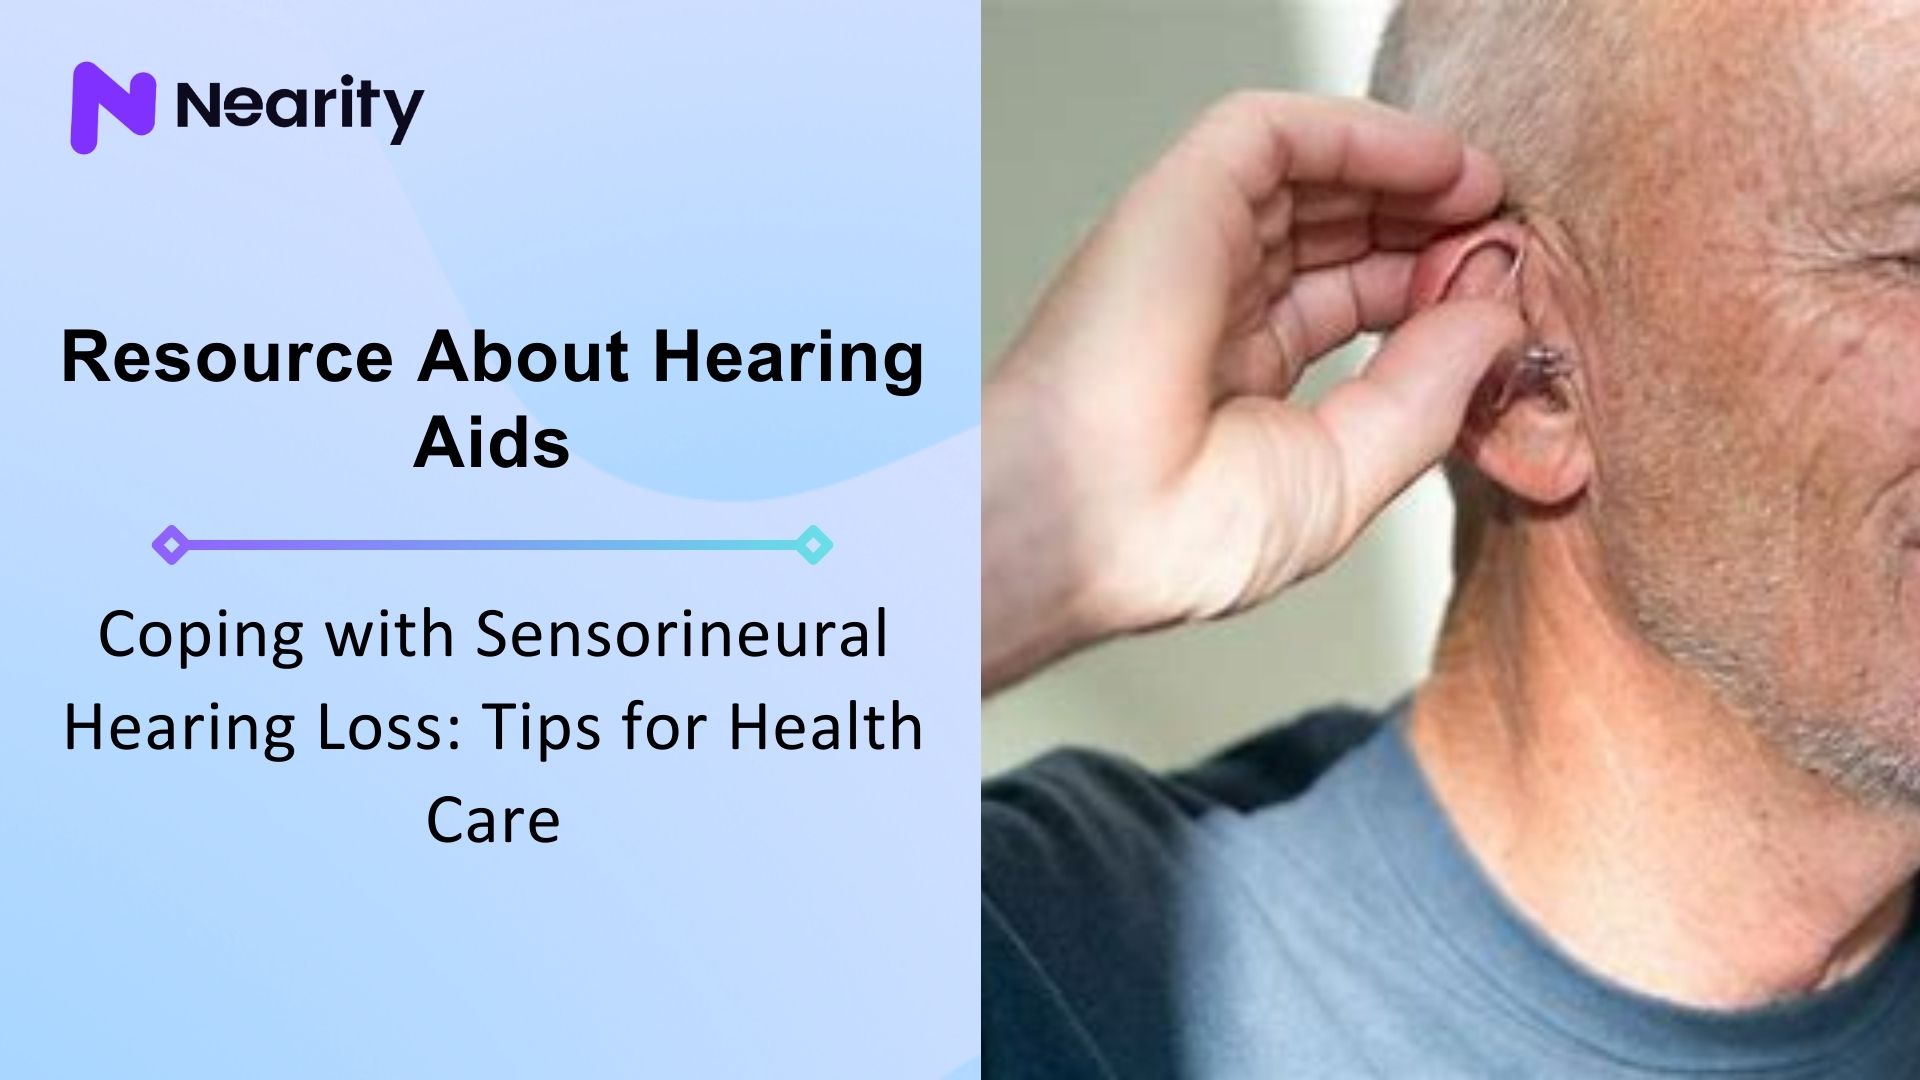 Coping with Sensorineural Hearing Loss: Tips for Health Care